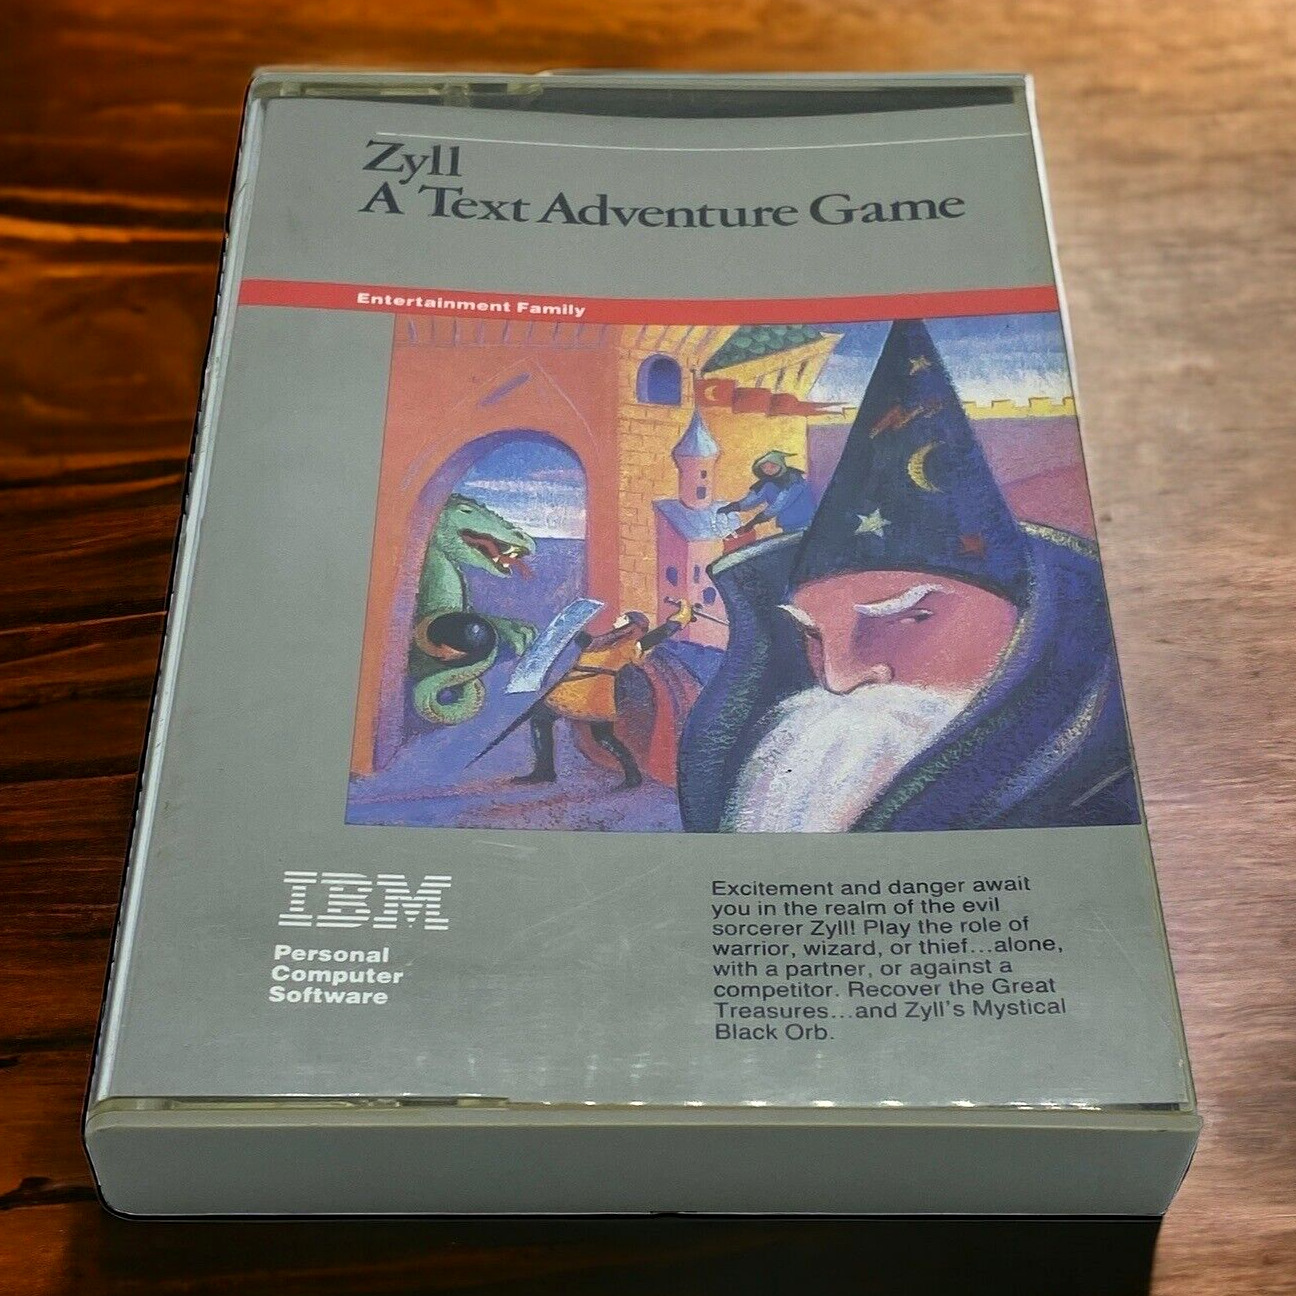 1984 Zyll IBM A Text Adventure Game Complete w/Case Manual Floppy